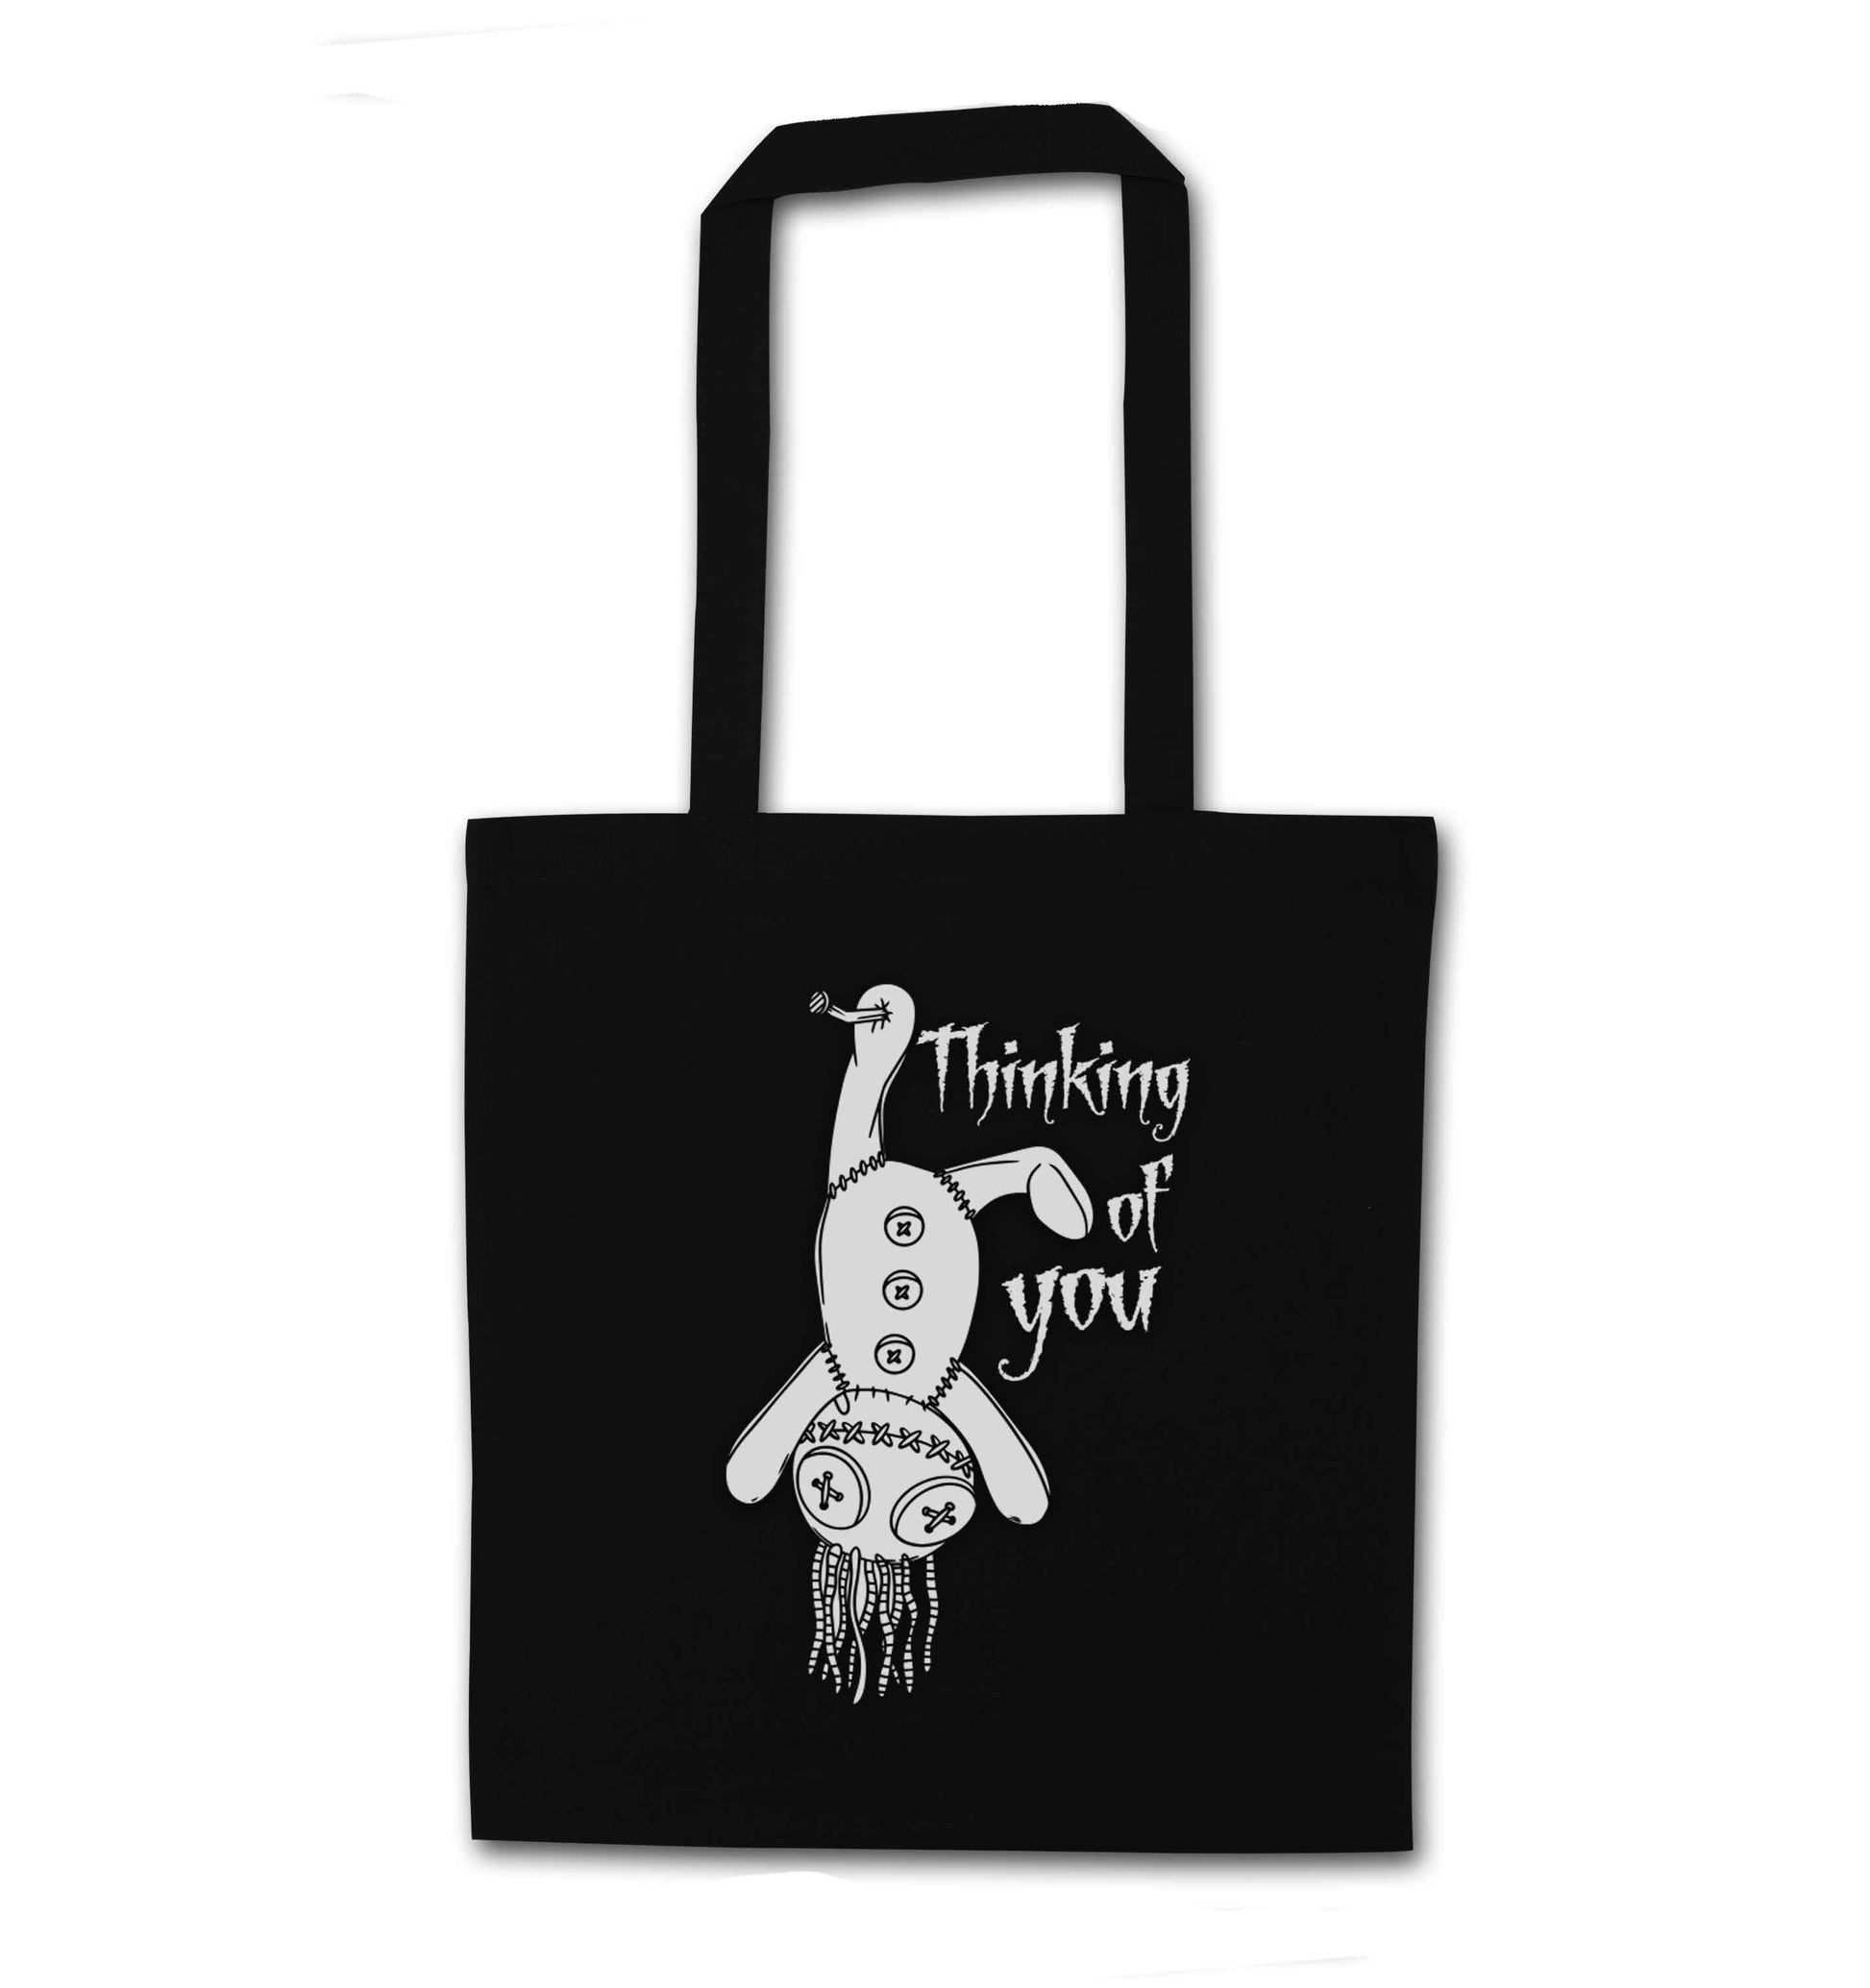 Thinking of you black tote bag